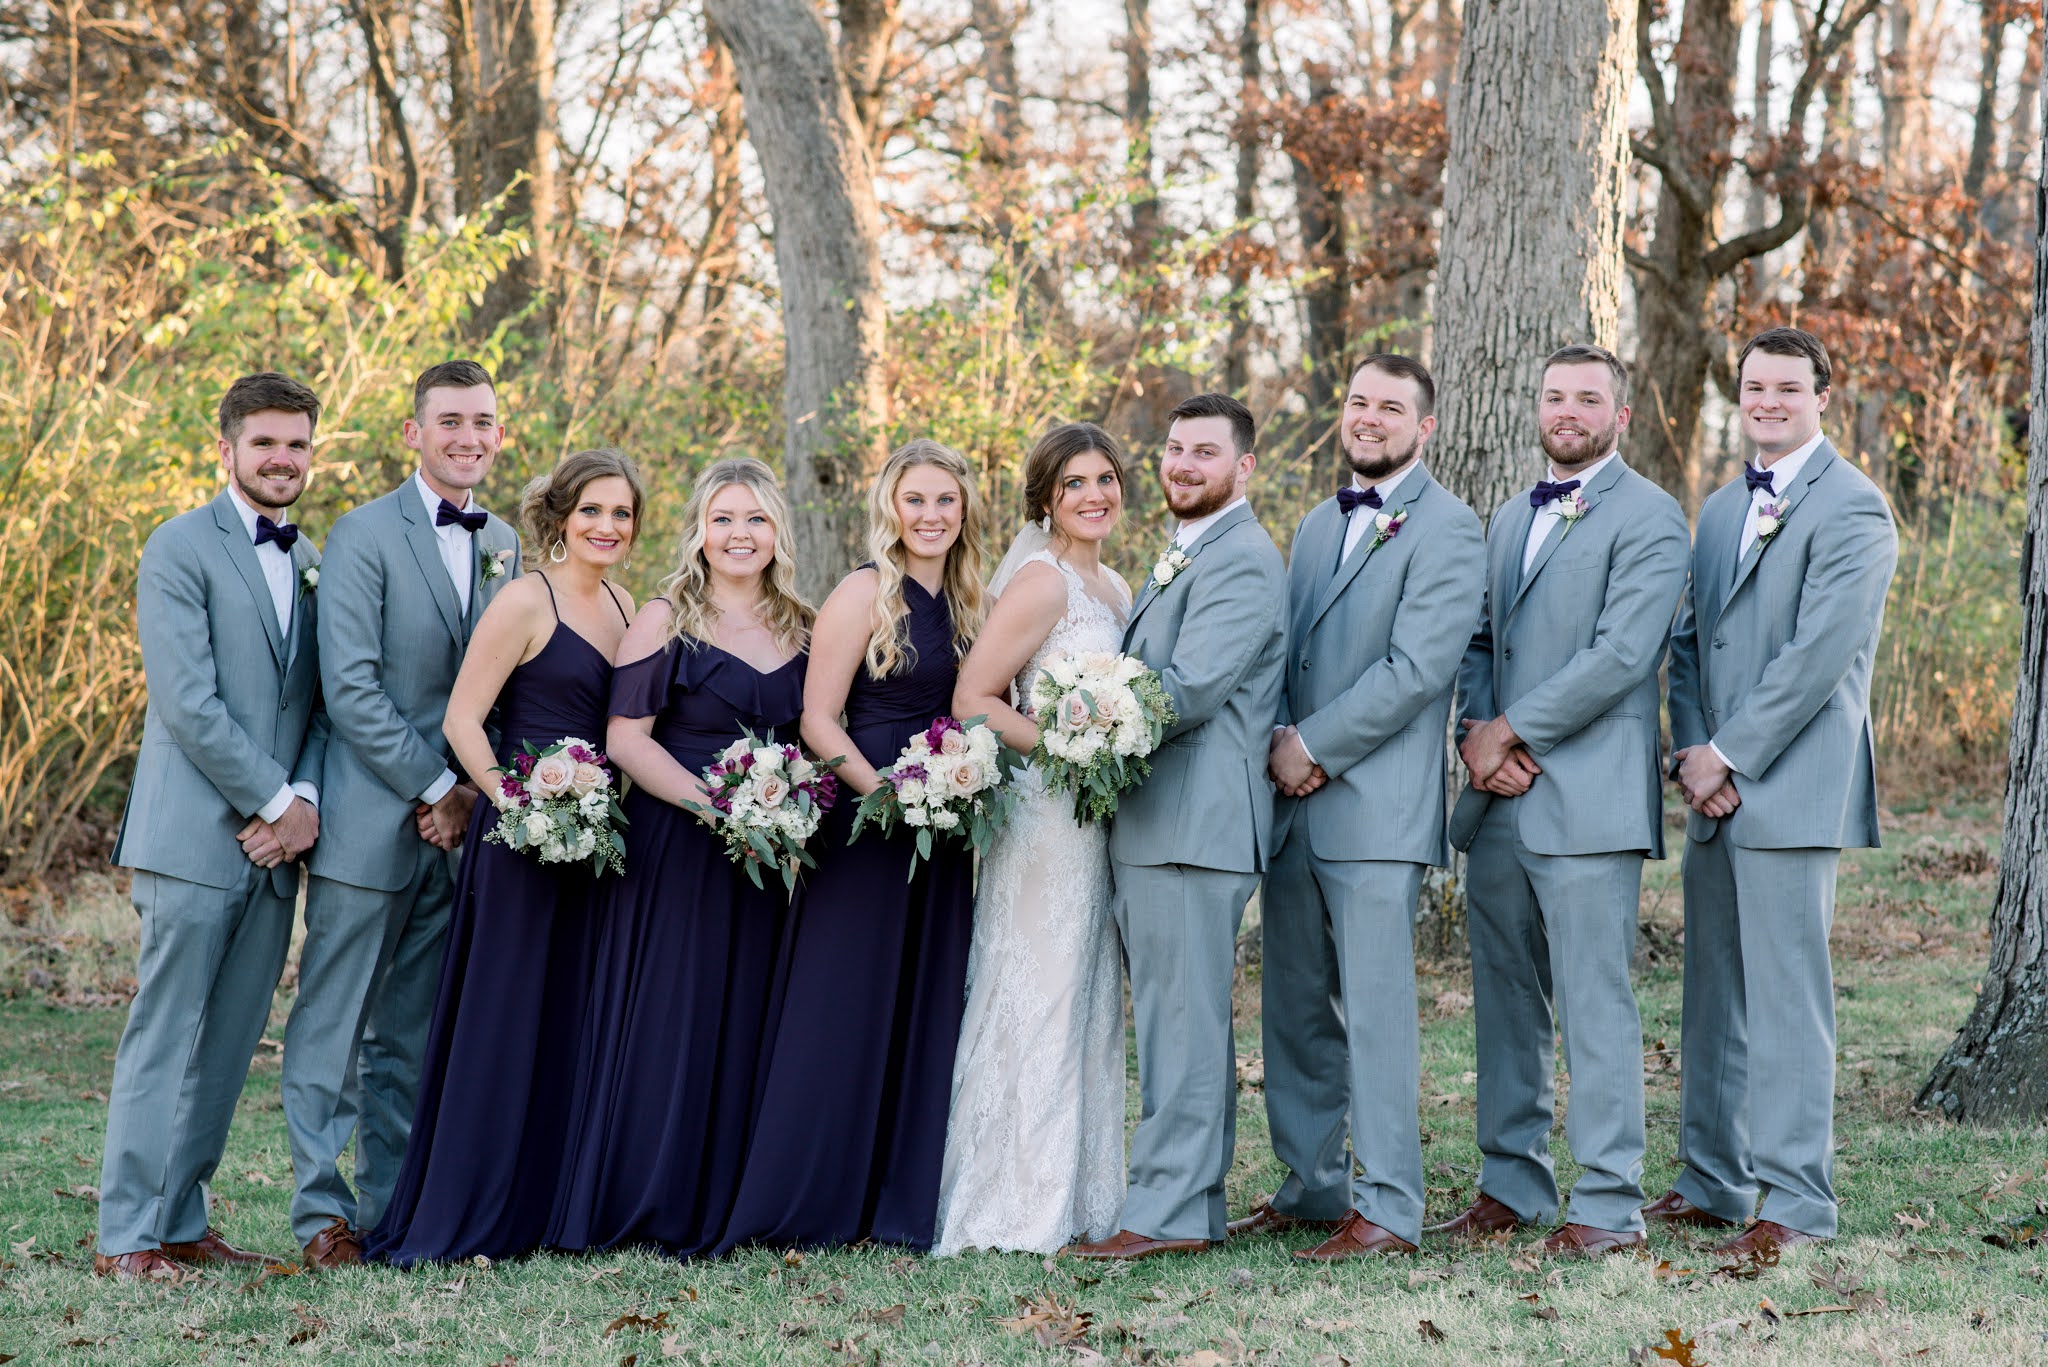 Paige & Buster are Married! | St. Charles Wedding Photographer | Bri ...